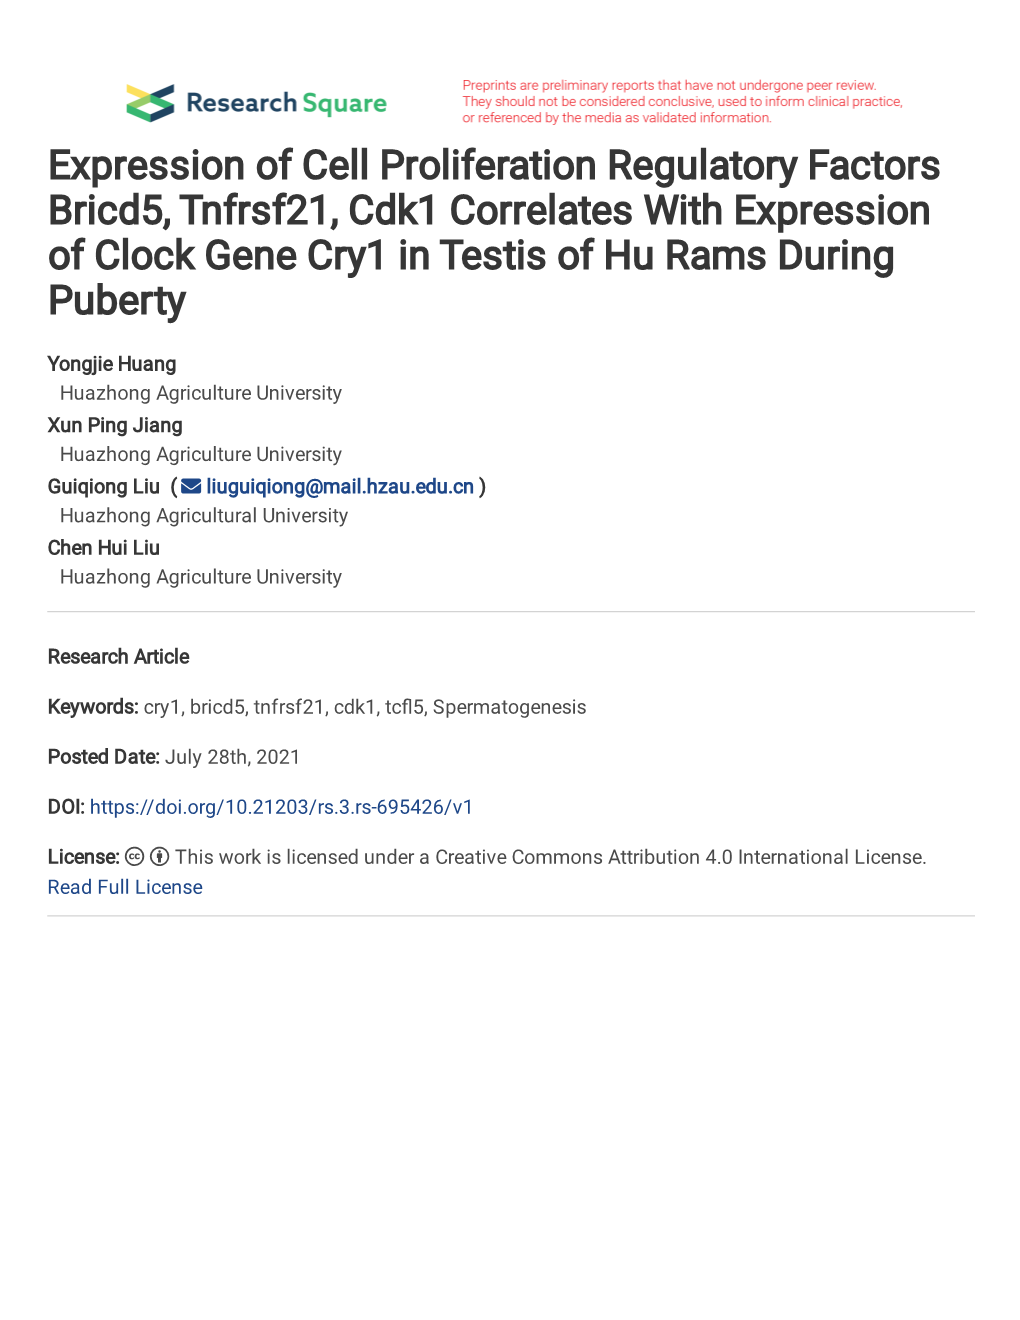 Expression of Cell Proliferation Regulatory Factors Bricd5, Tnfrsf21, Cdk1 Correlates with Expression of Clock Gene Cry1 in Testis of Hu Rams During Puberty